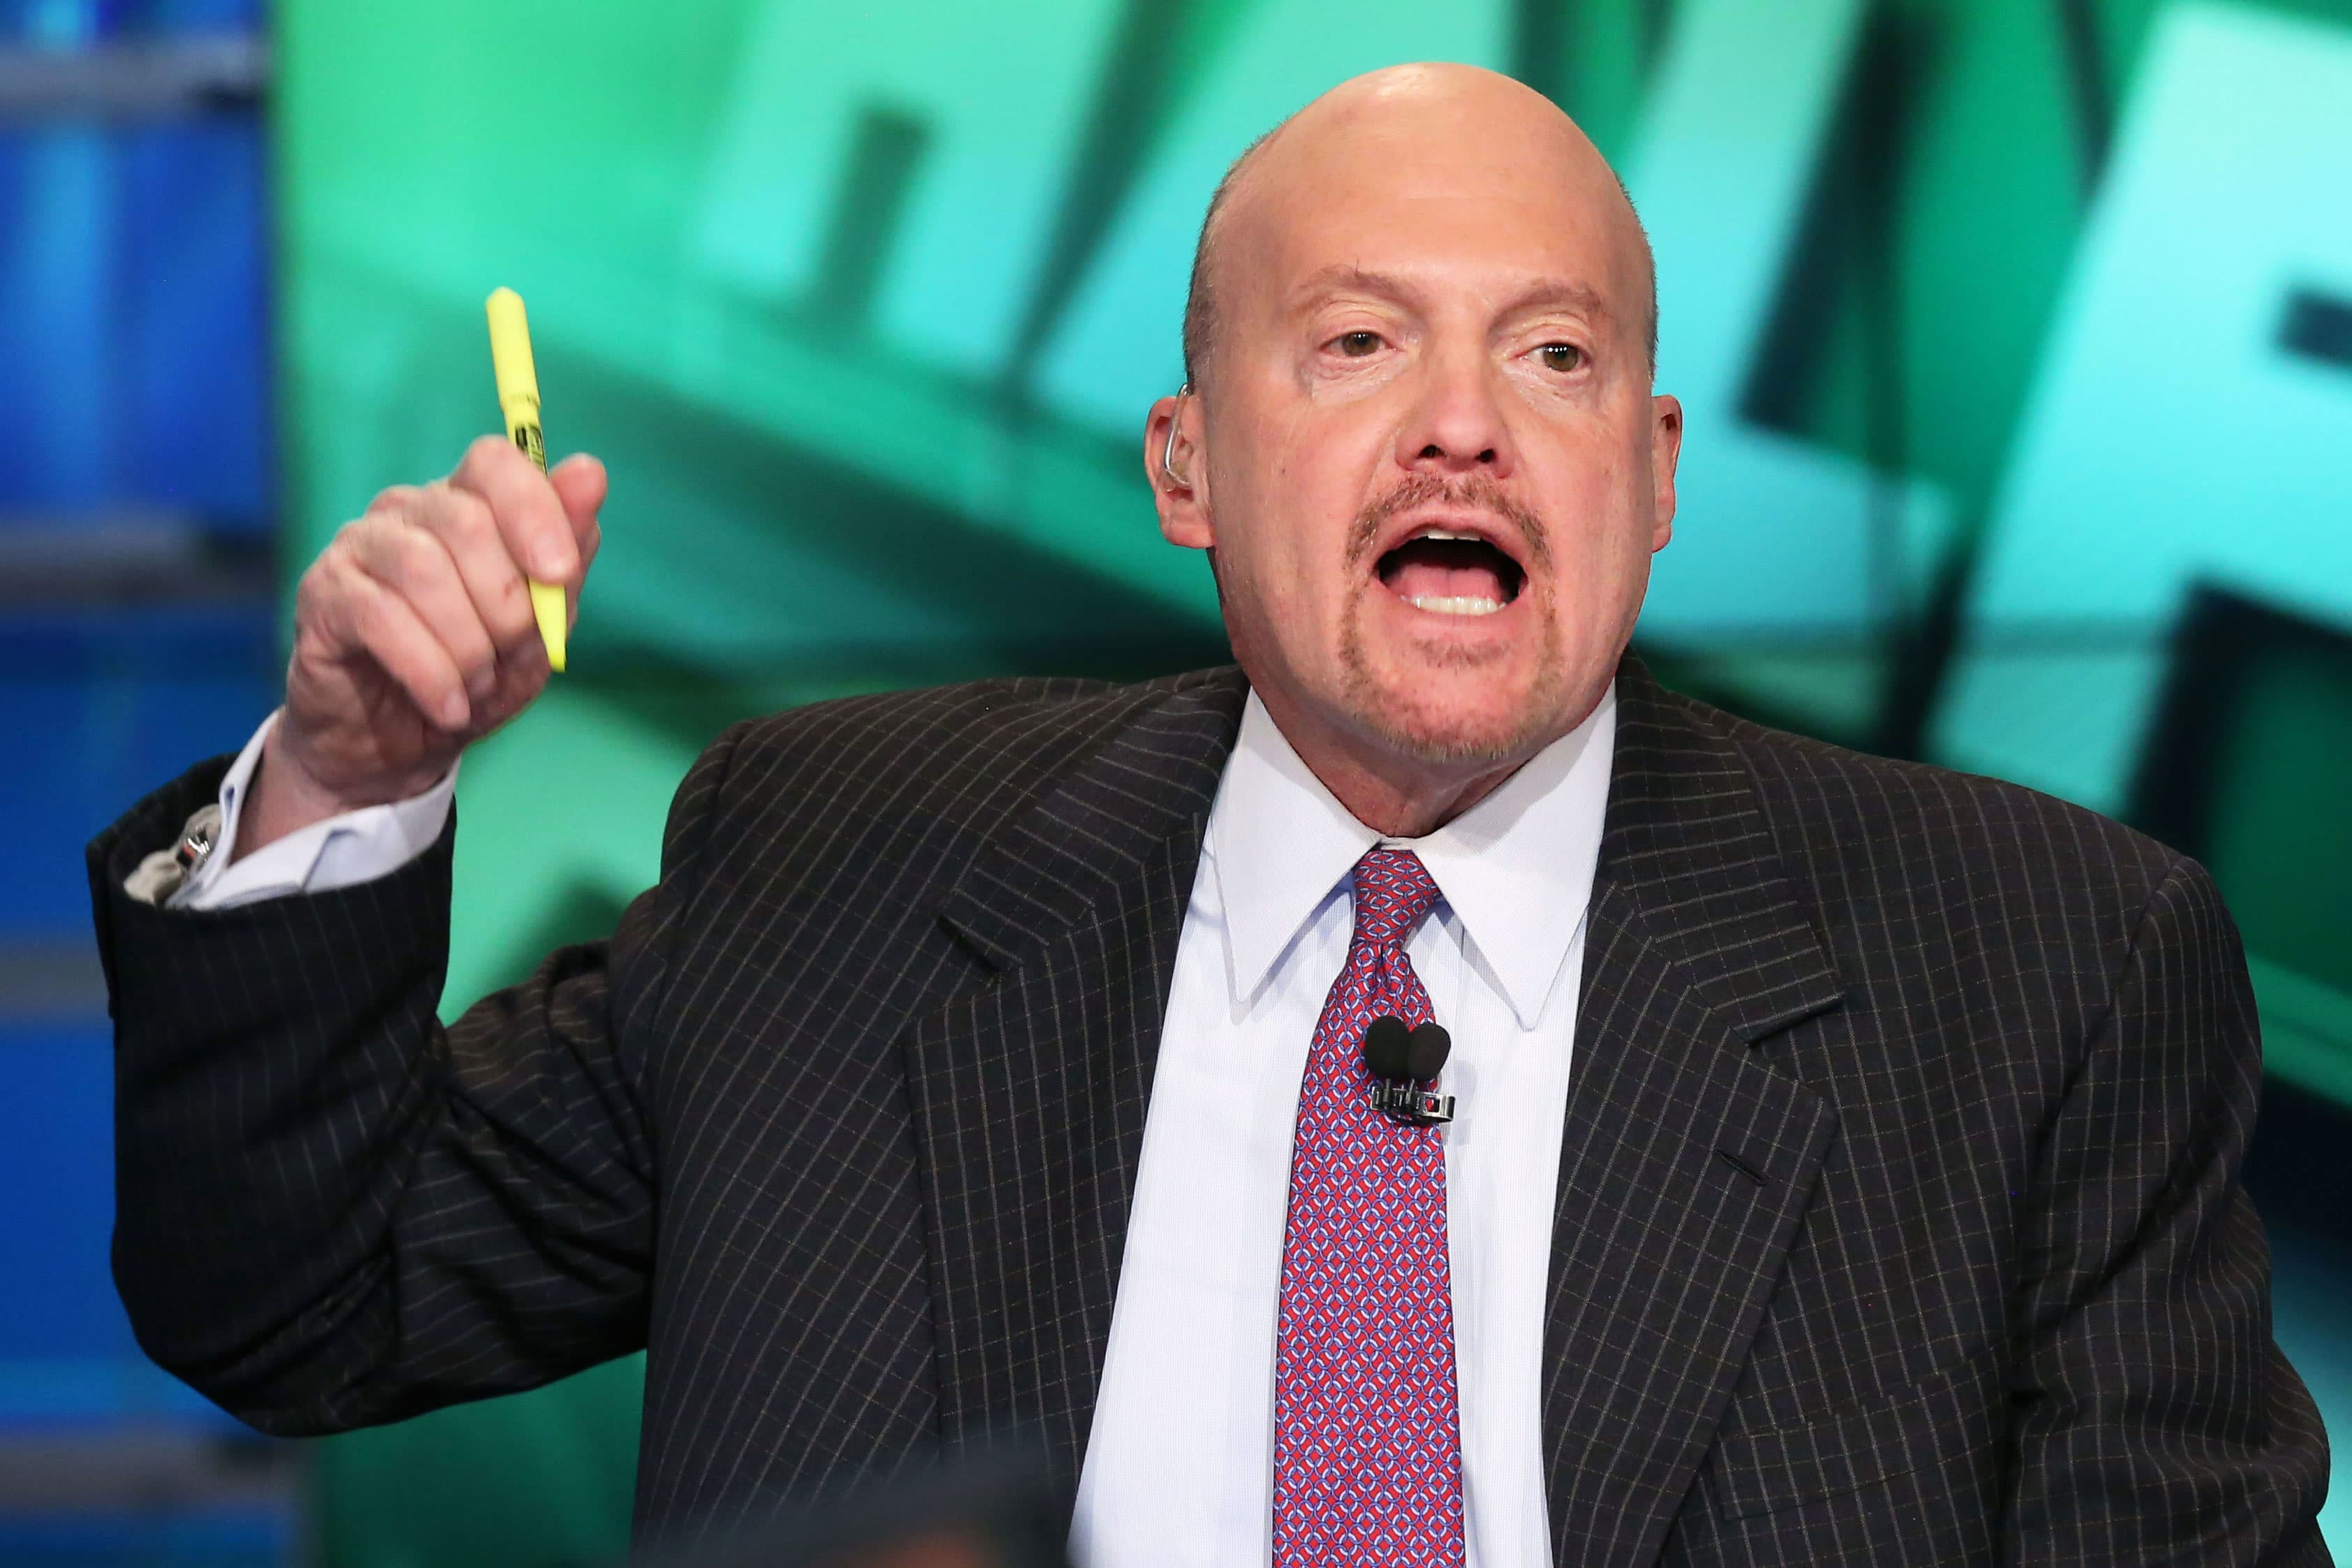 Jim Cramer's Investing Club meeting Friday: Inflation, semiconductors, Salesforce